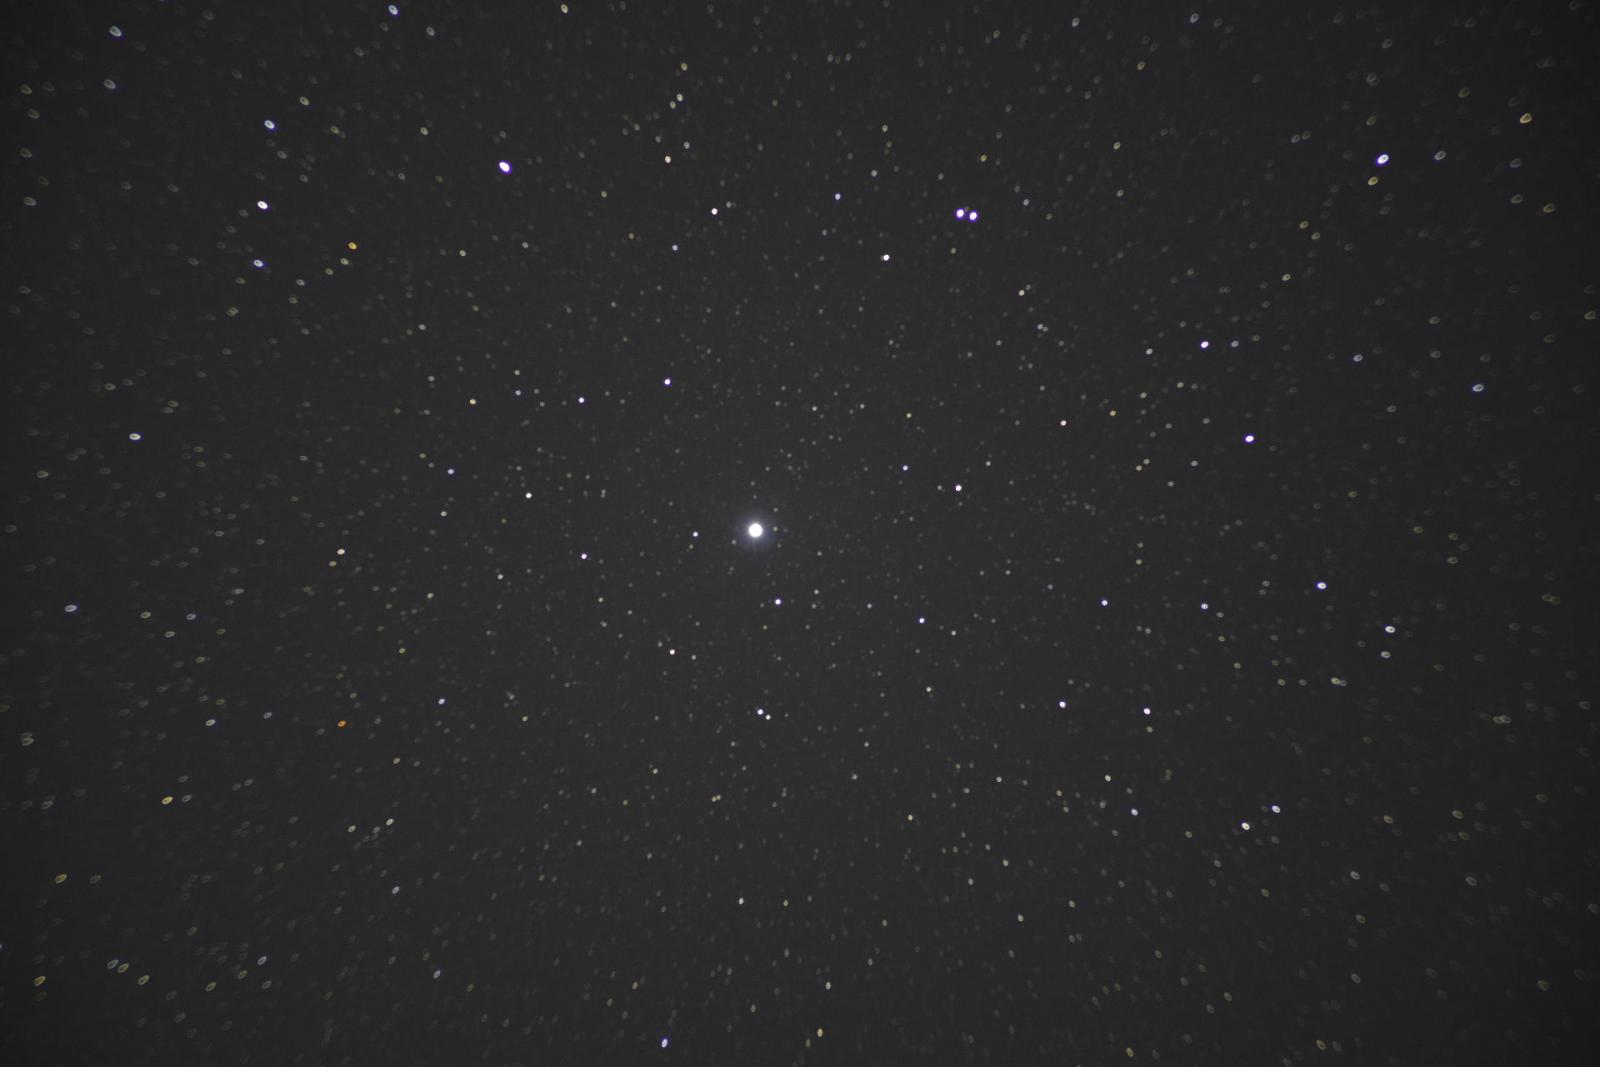 Why star halos with Tamron SP 360B 300mm f/2.8 LD? - DSLR